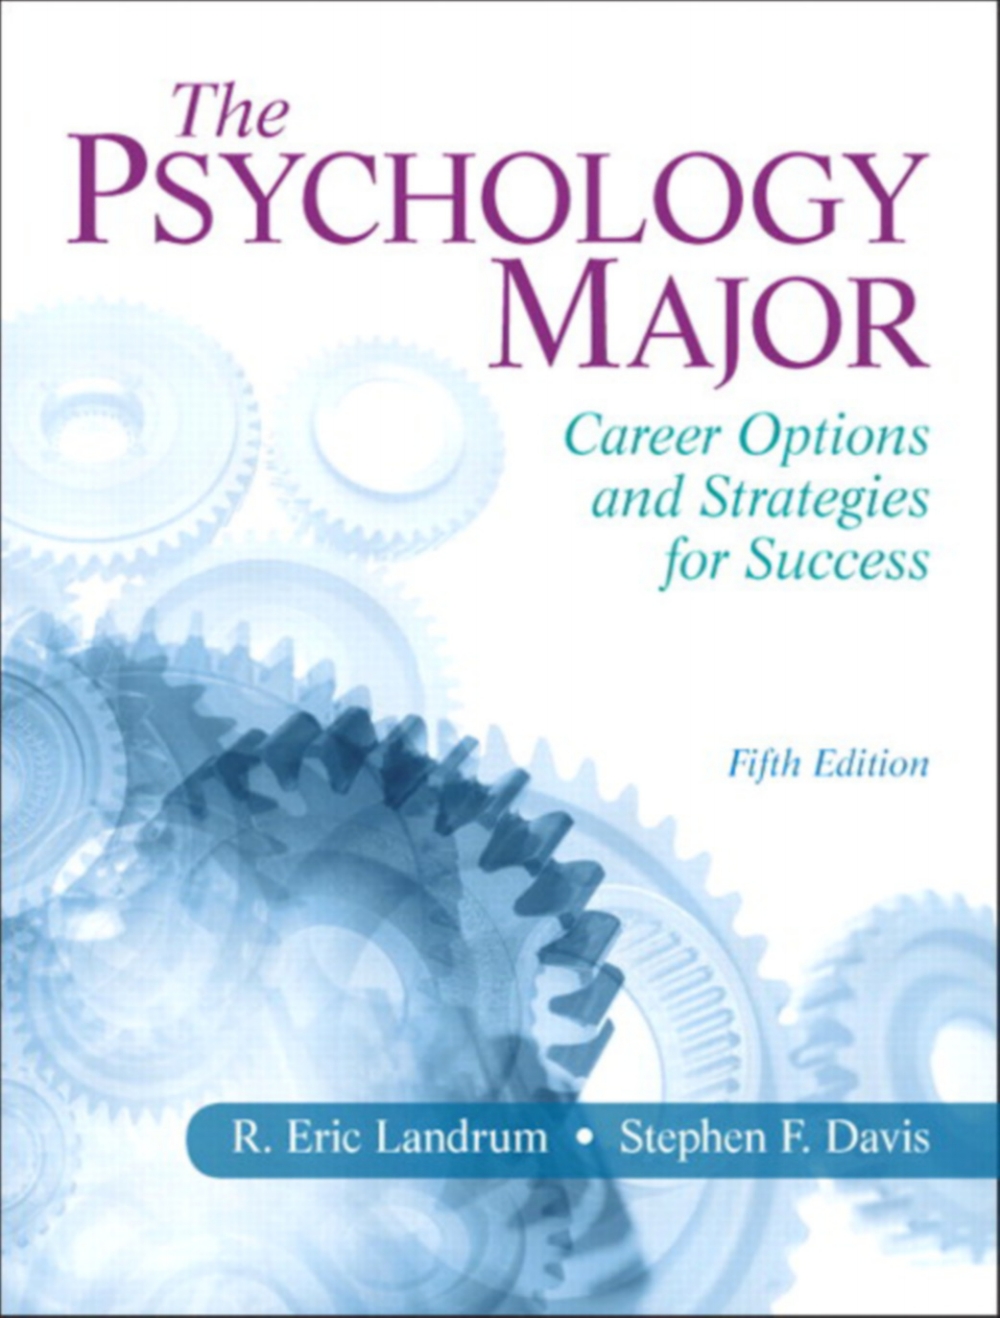 The Psychology Major: Career Options and Strategies for Success (5th Edition) – eBook PDF